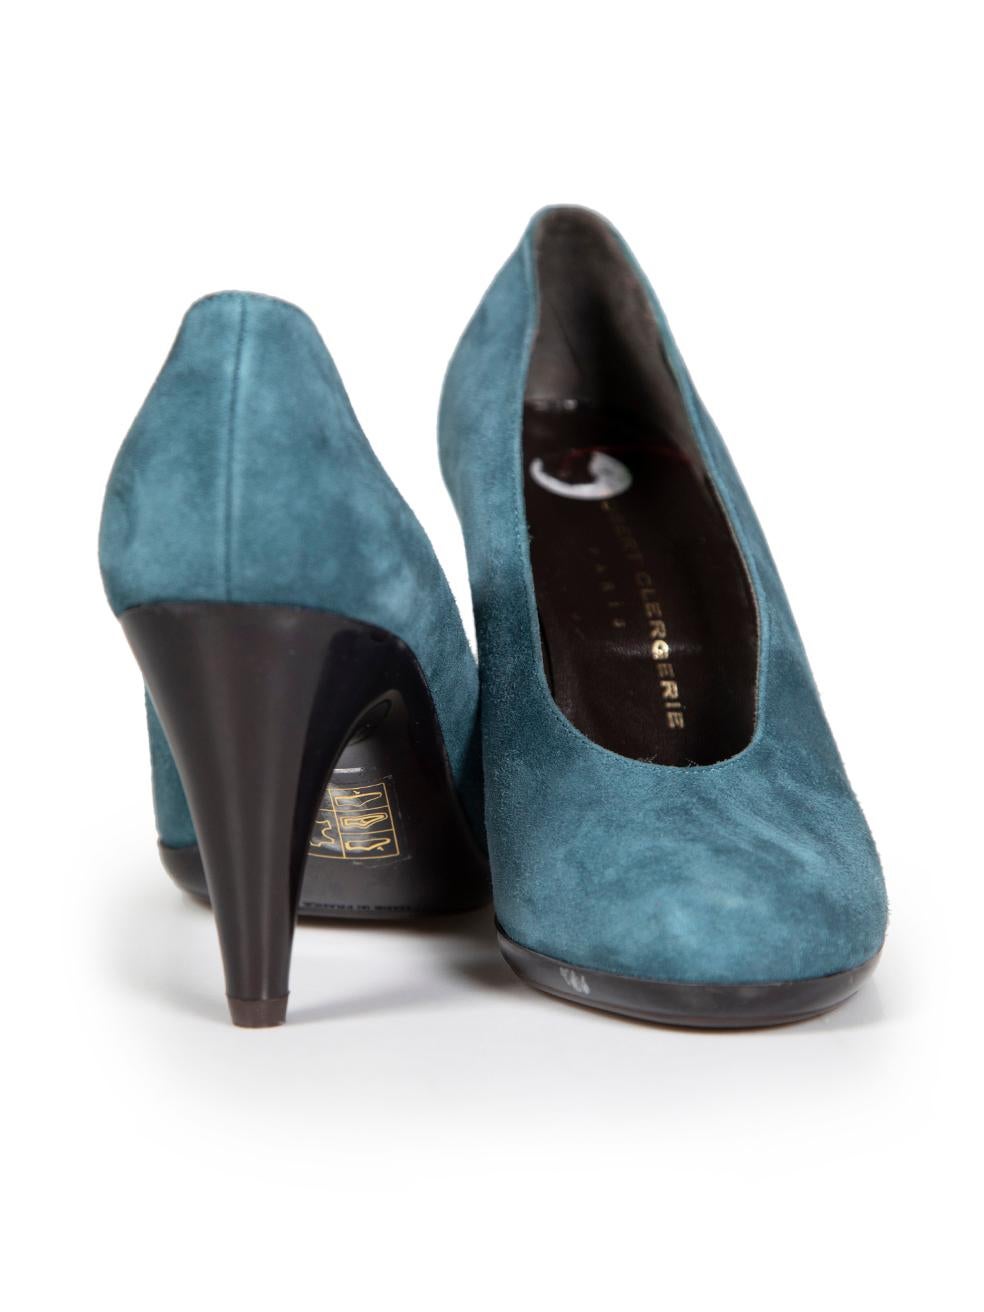 Clergerie Teal Suede Sculptural Pumps Size UK 5 In Good Condition For Sale In London, GB